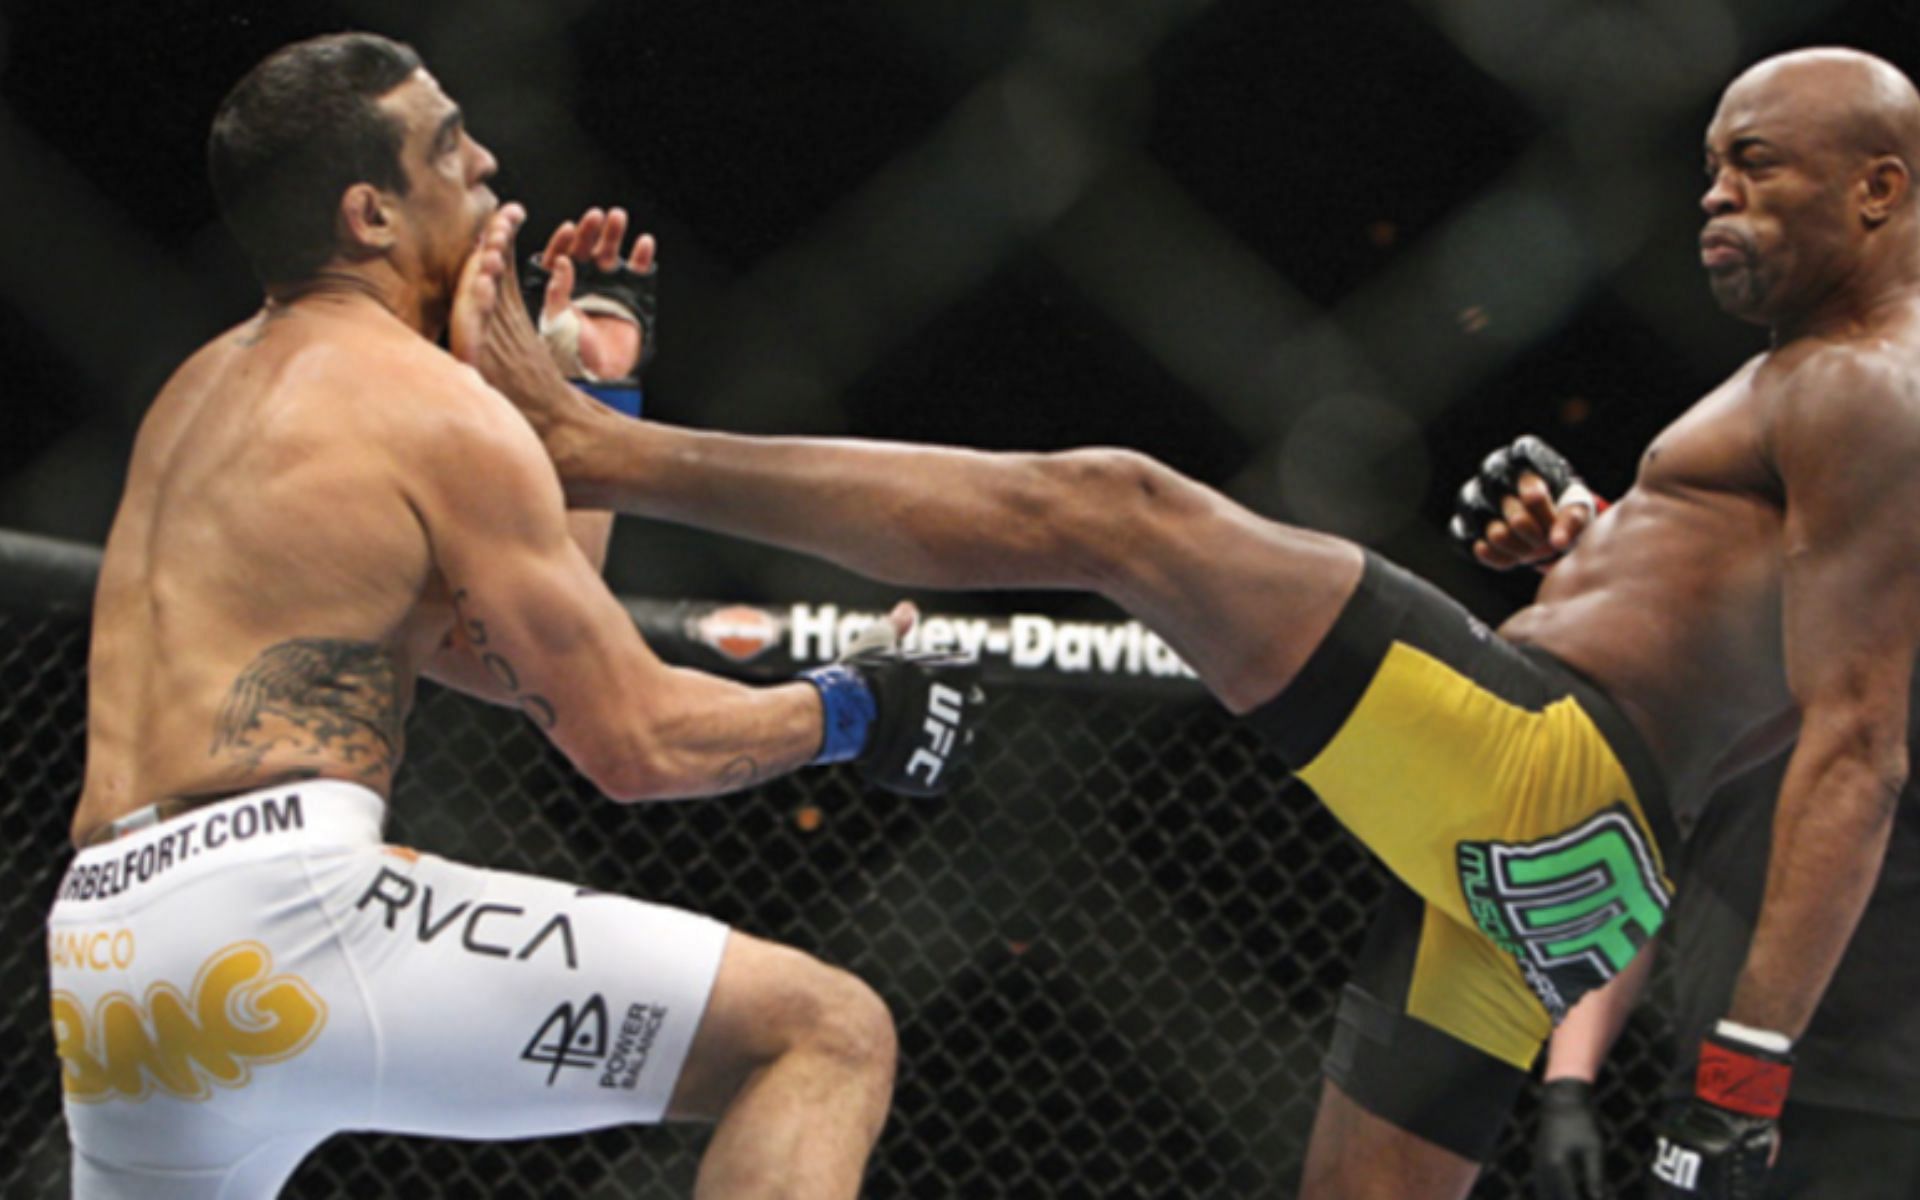 The front kick can be used in devastating fashion in the UFC, as we saw when Anderson Silva stopped Vitor Belfort